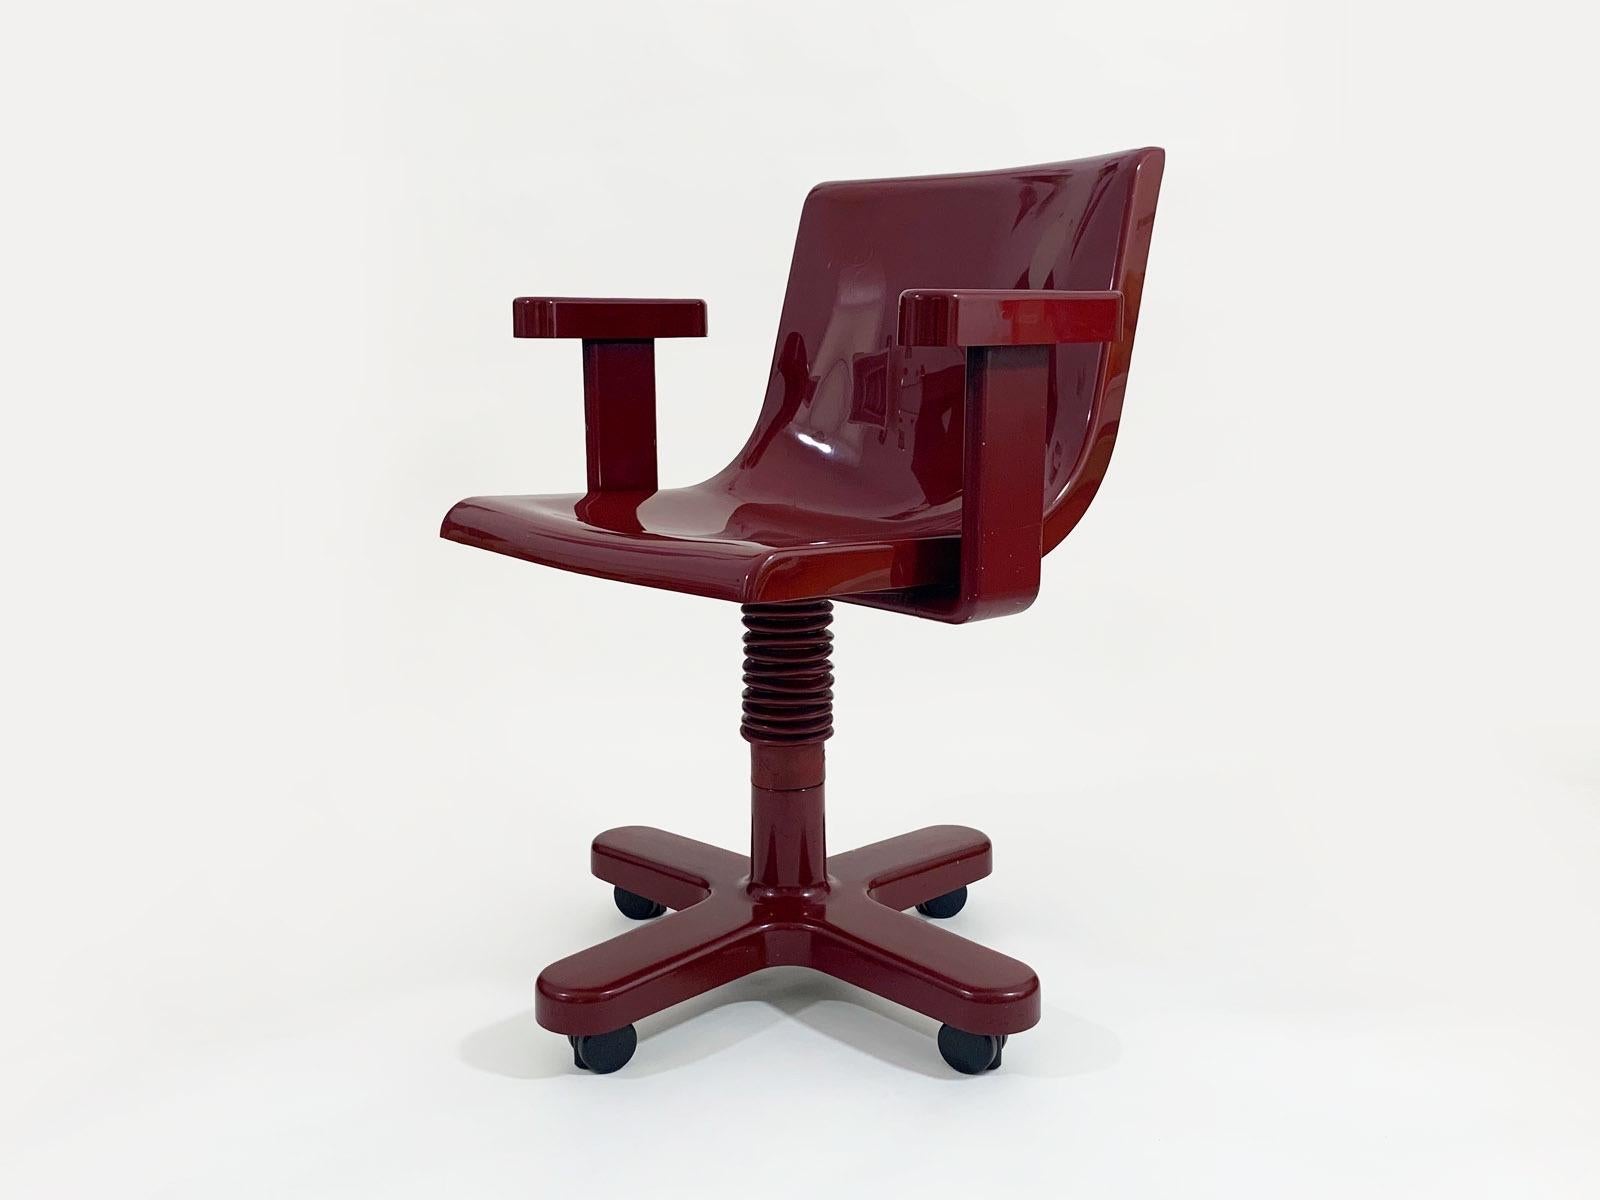 Olivetti 'Synthesis' desk chair made from ABS plastic, beautifully colored in an oxblood red also known as the Memphis color. The chair is featured in the permanent collection of the Museum of Modern Art in New York.
Good vintage condition. Some